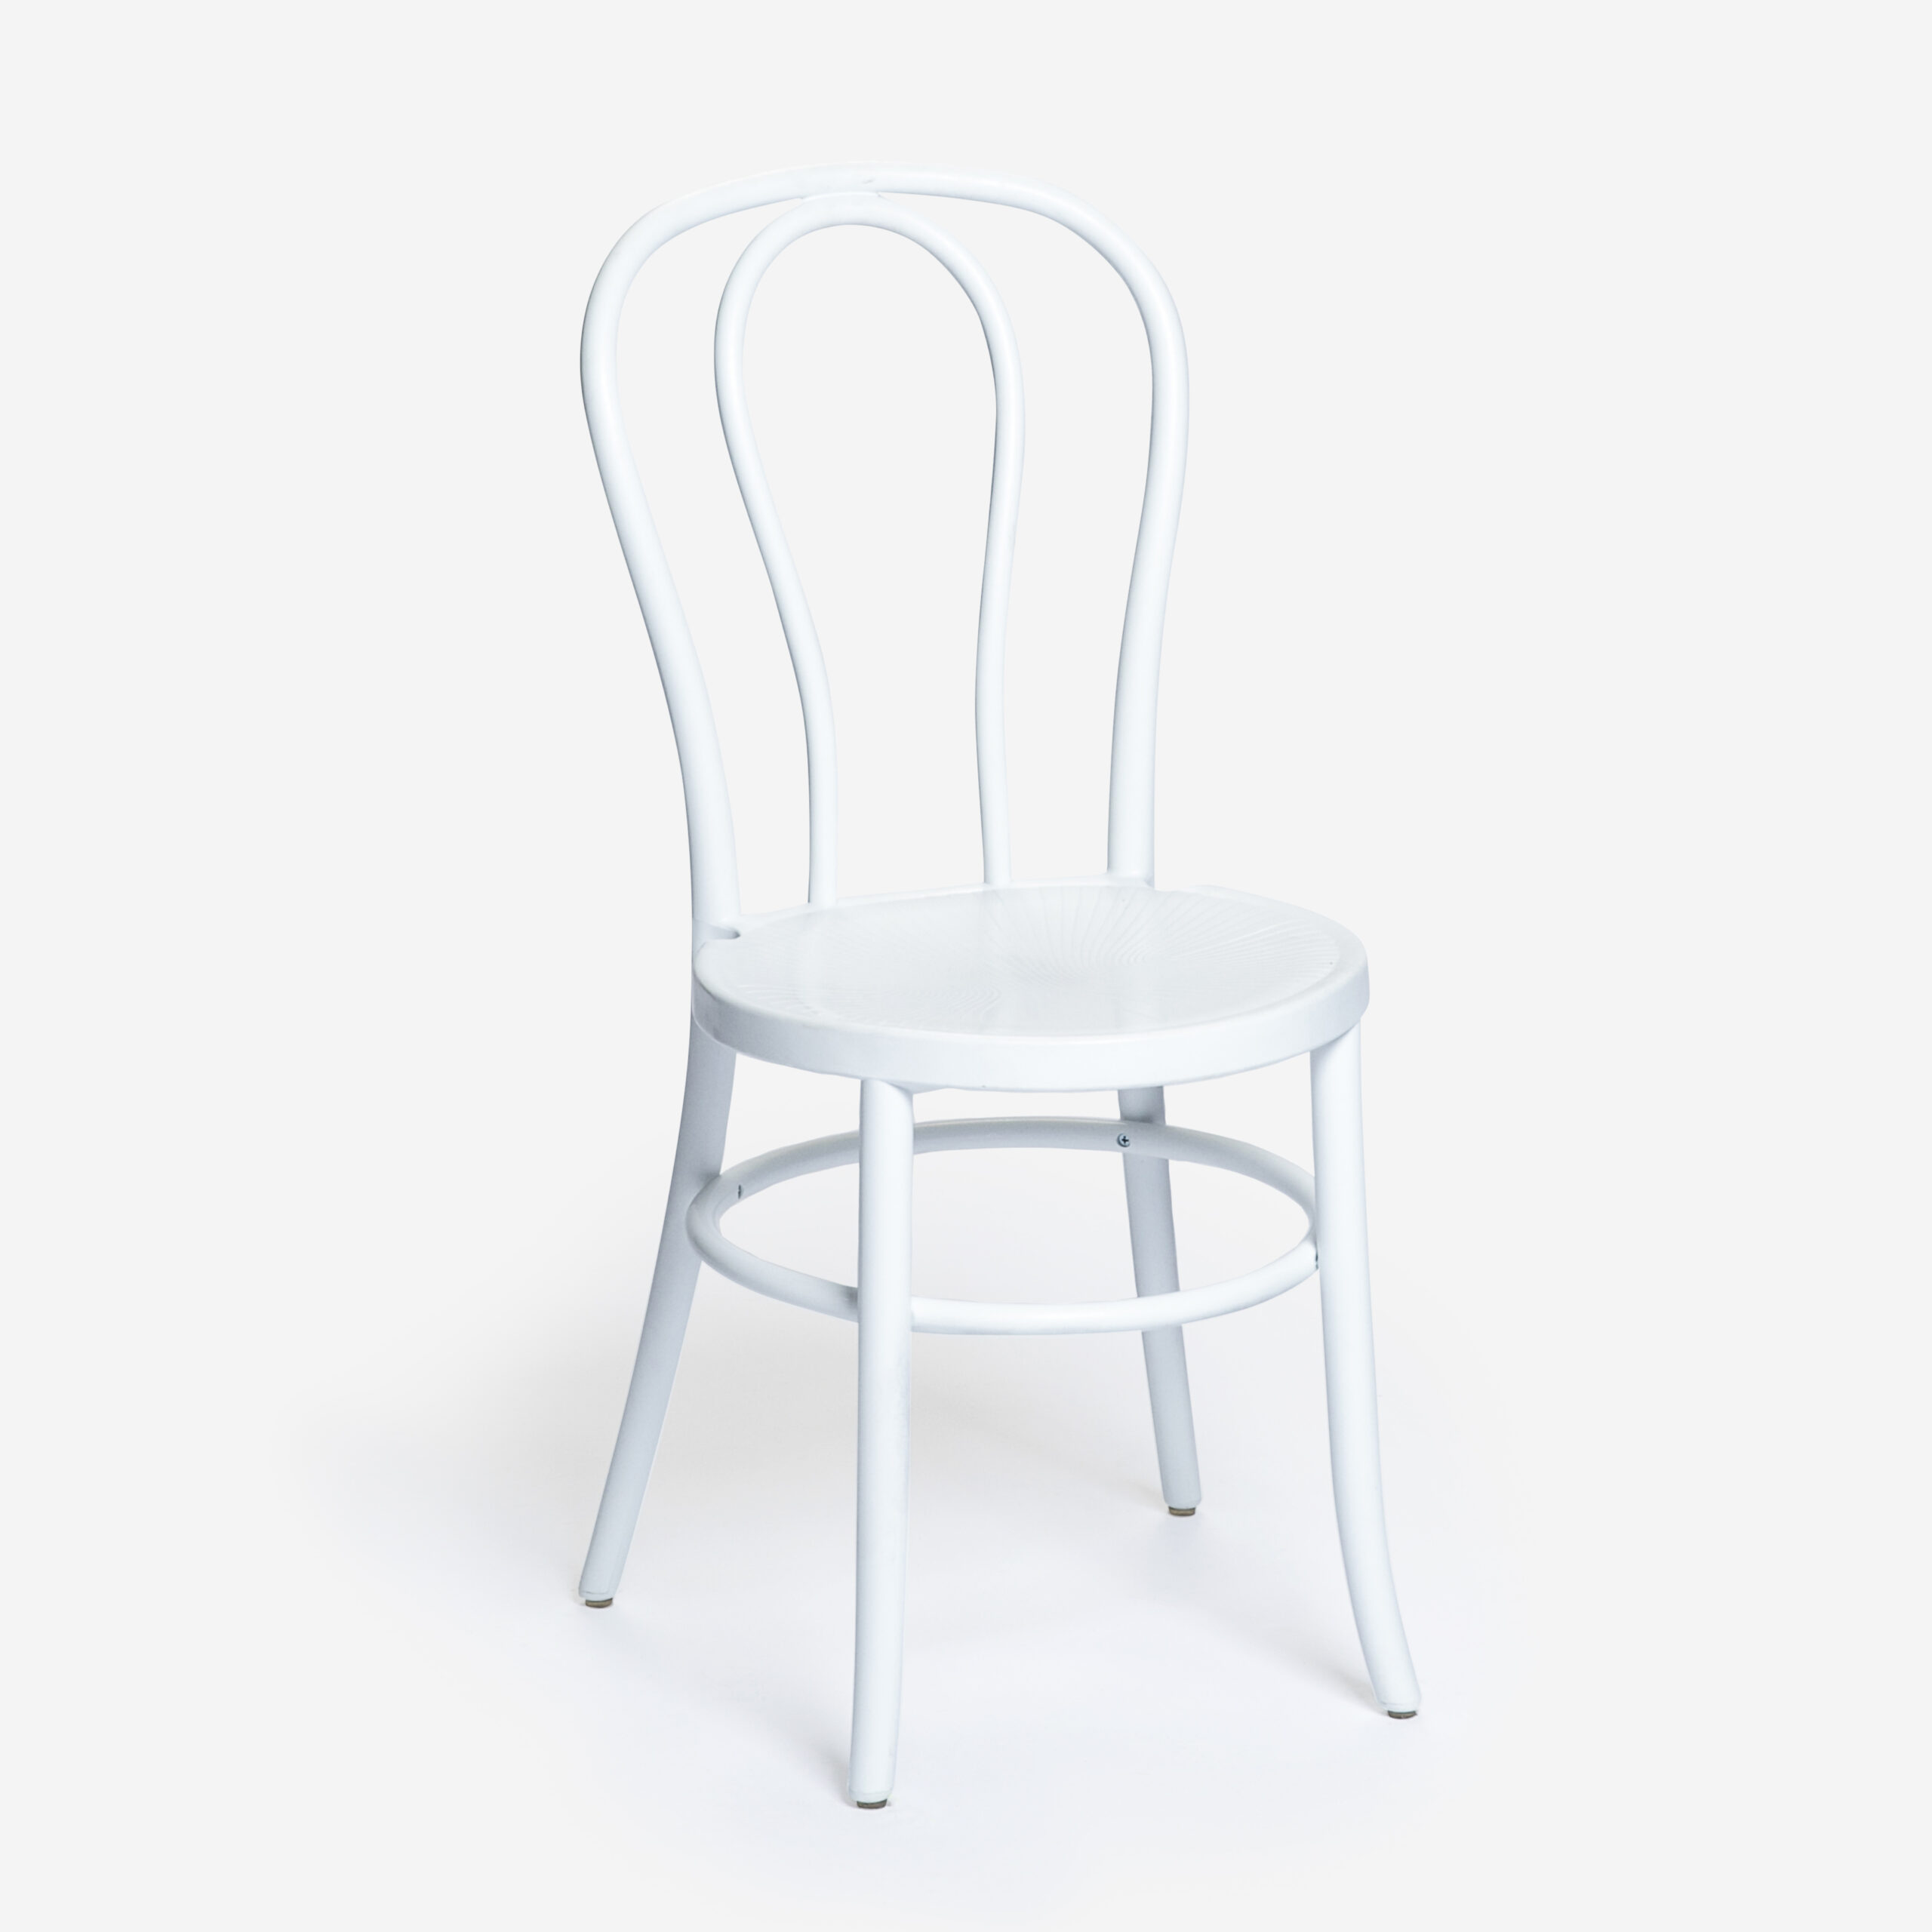 White Bentwood Chairs